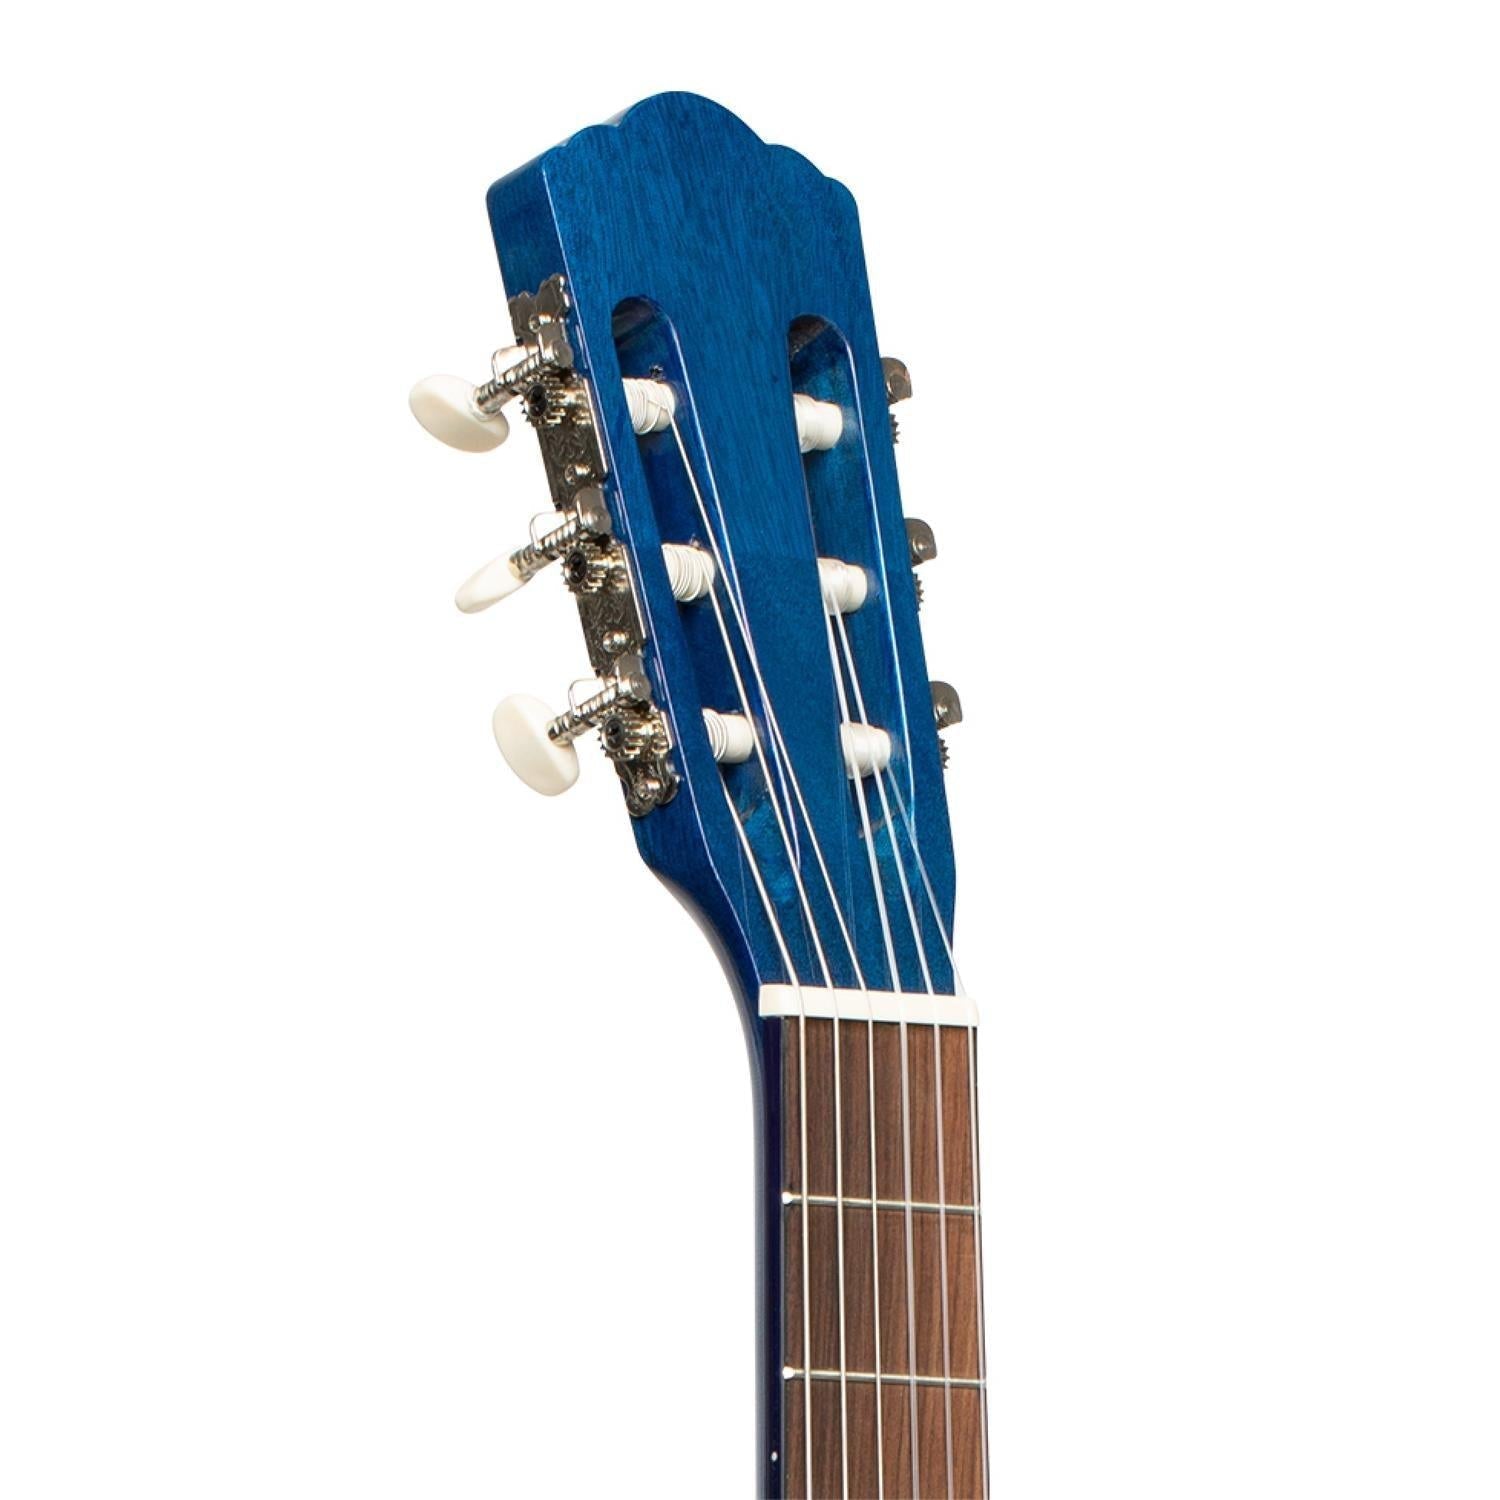 Stagg SCL50-Blue Classical Guitar - DY Pro Audio